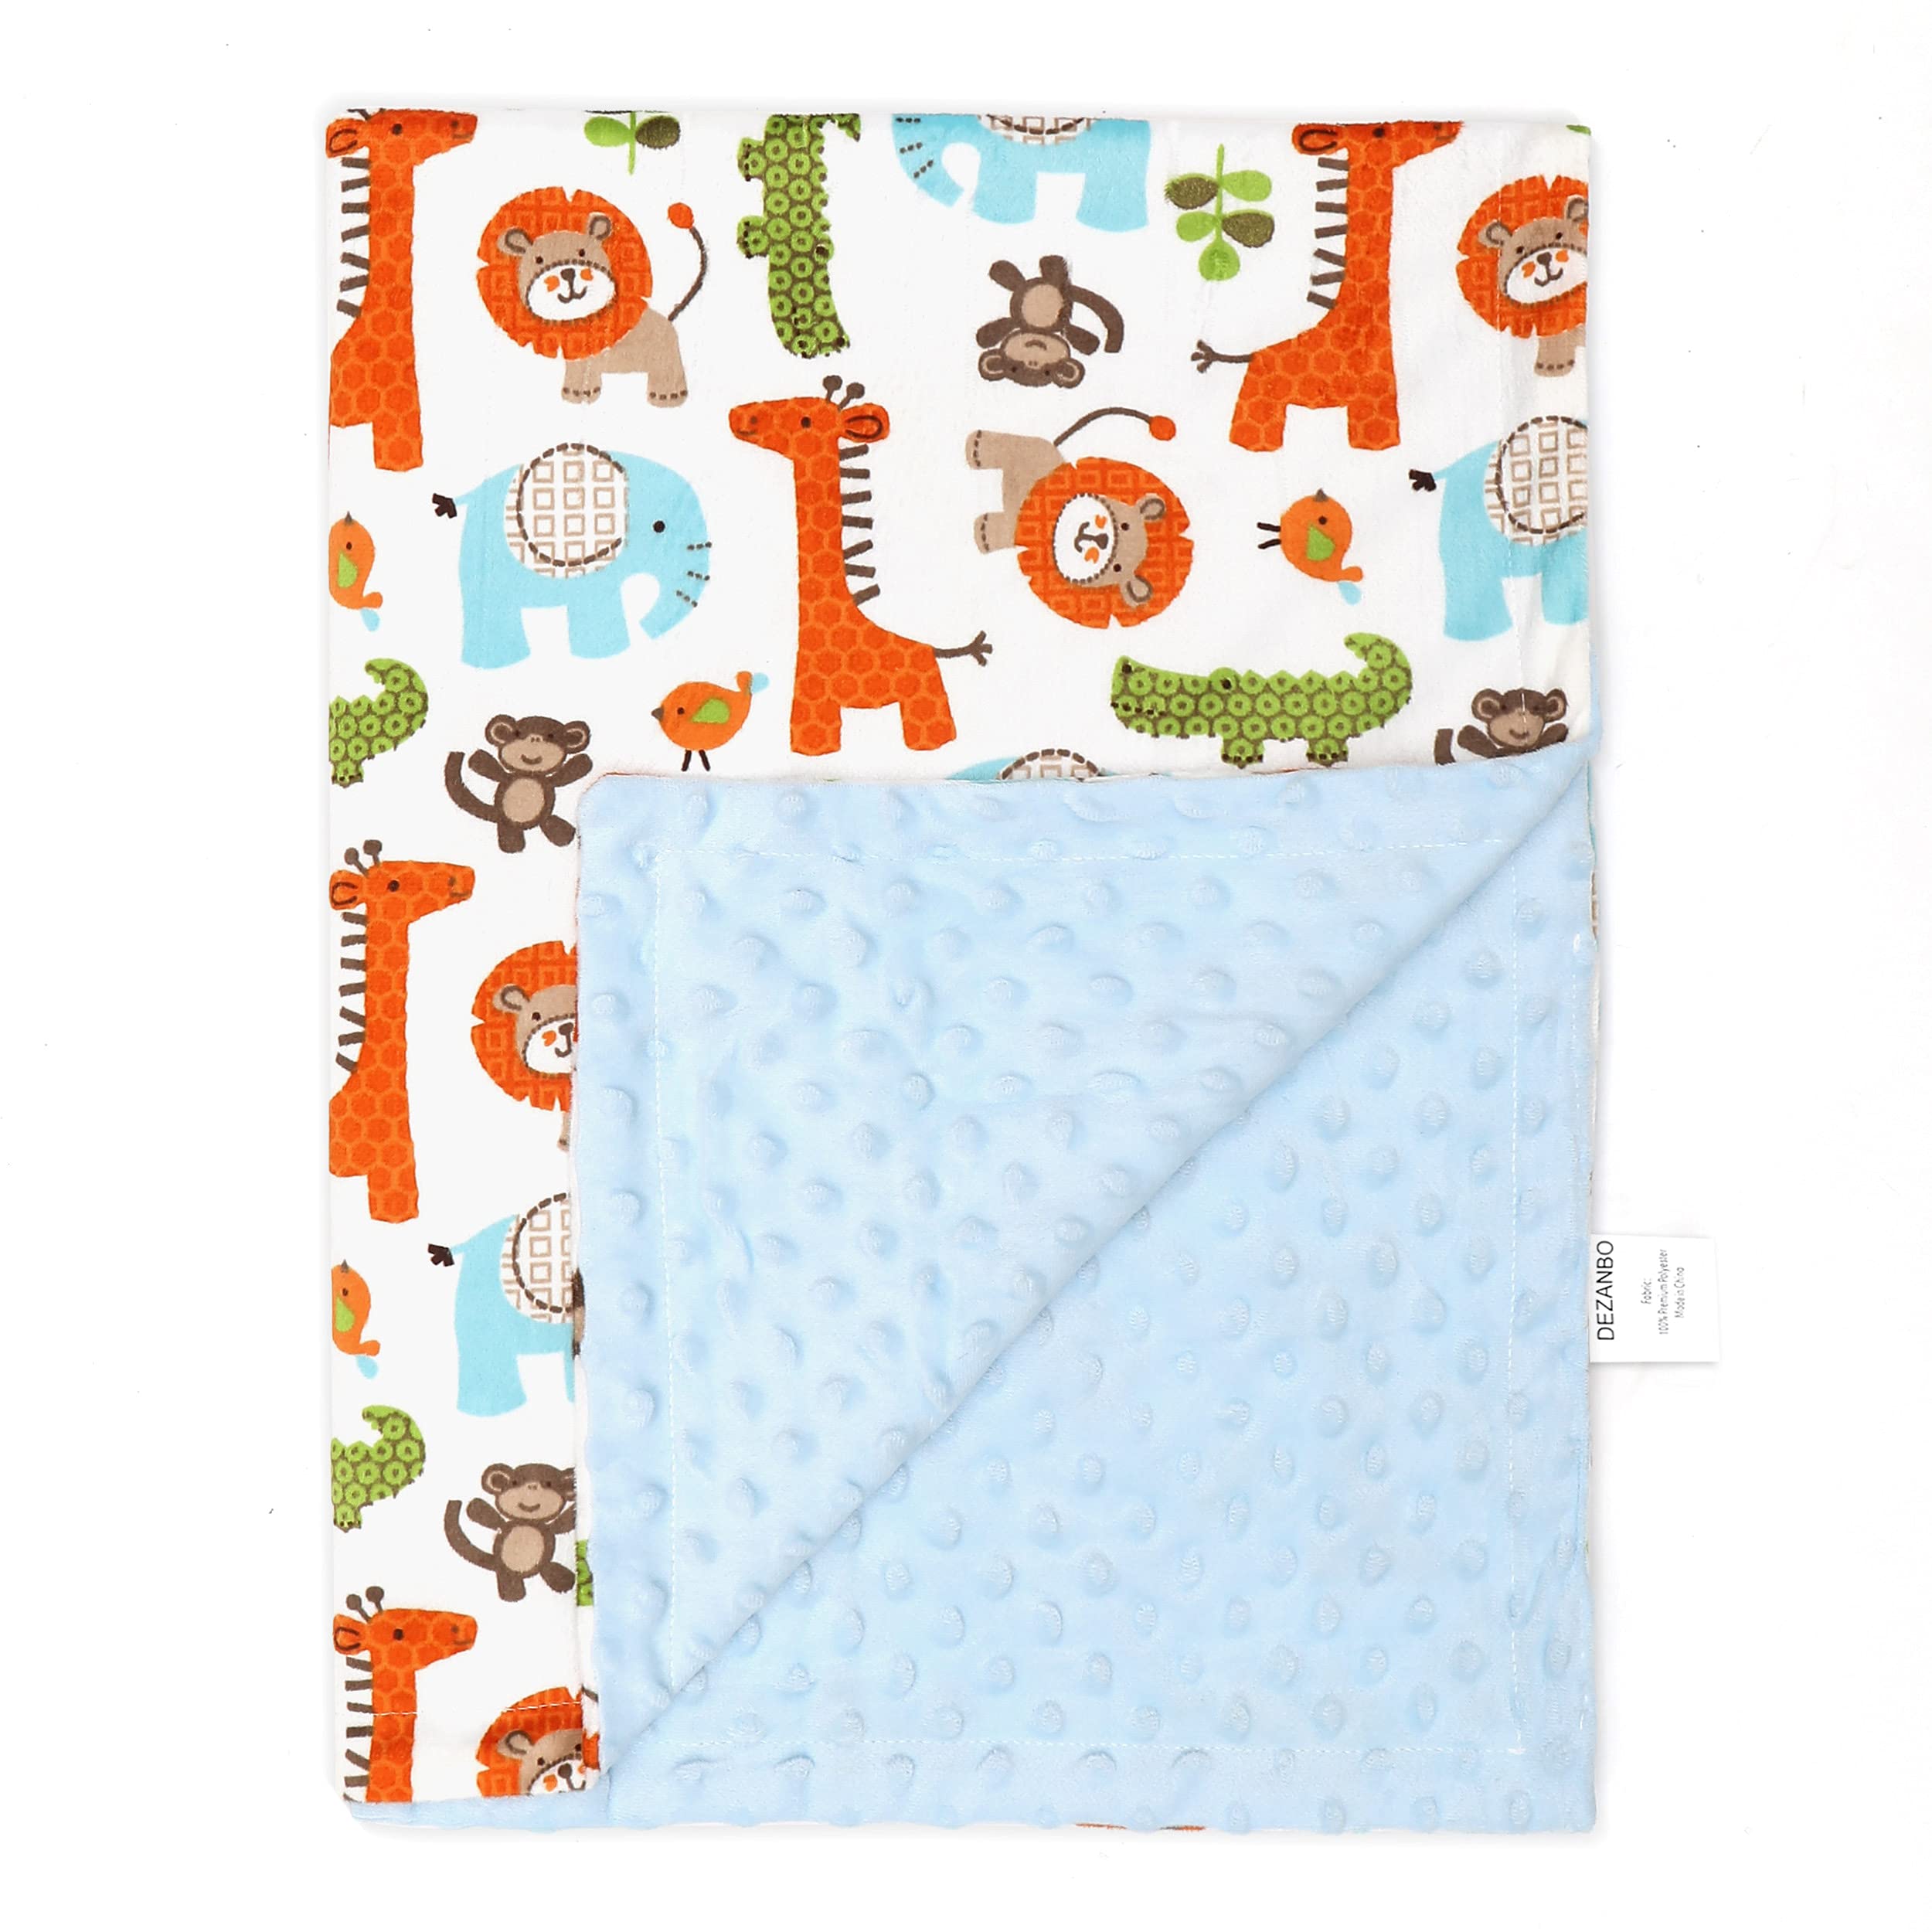 DEZANBO Baby Blanket for Boys Girls Baby Blankets Newborn,Super Soft Comfy,Patterned Minky with Double Layer,Dotted Backing, 30 x 40 Inc